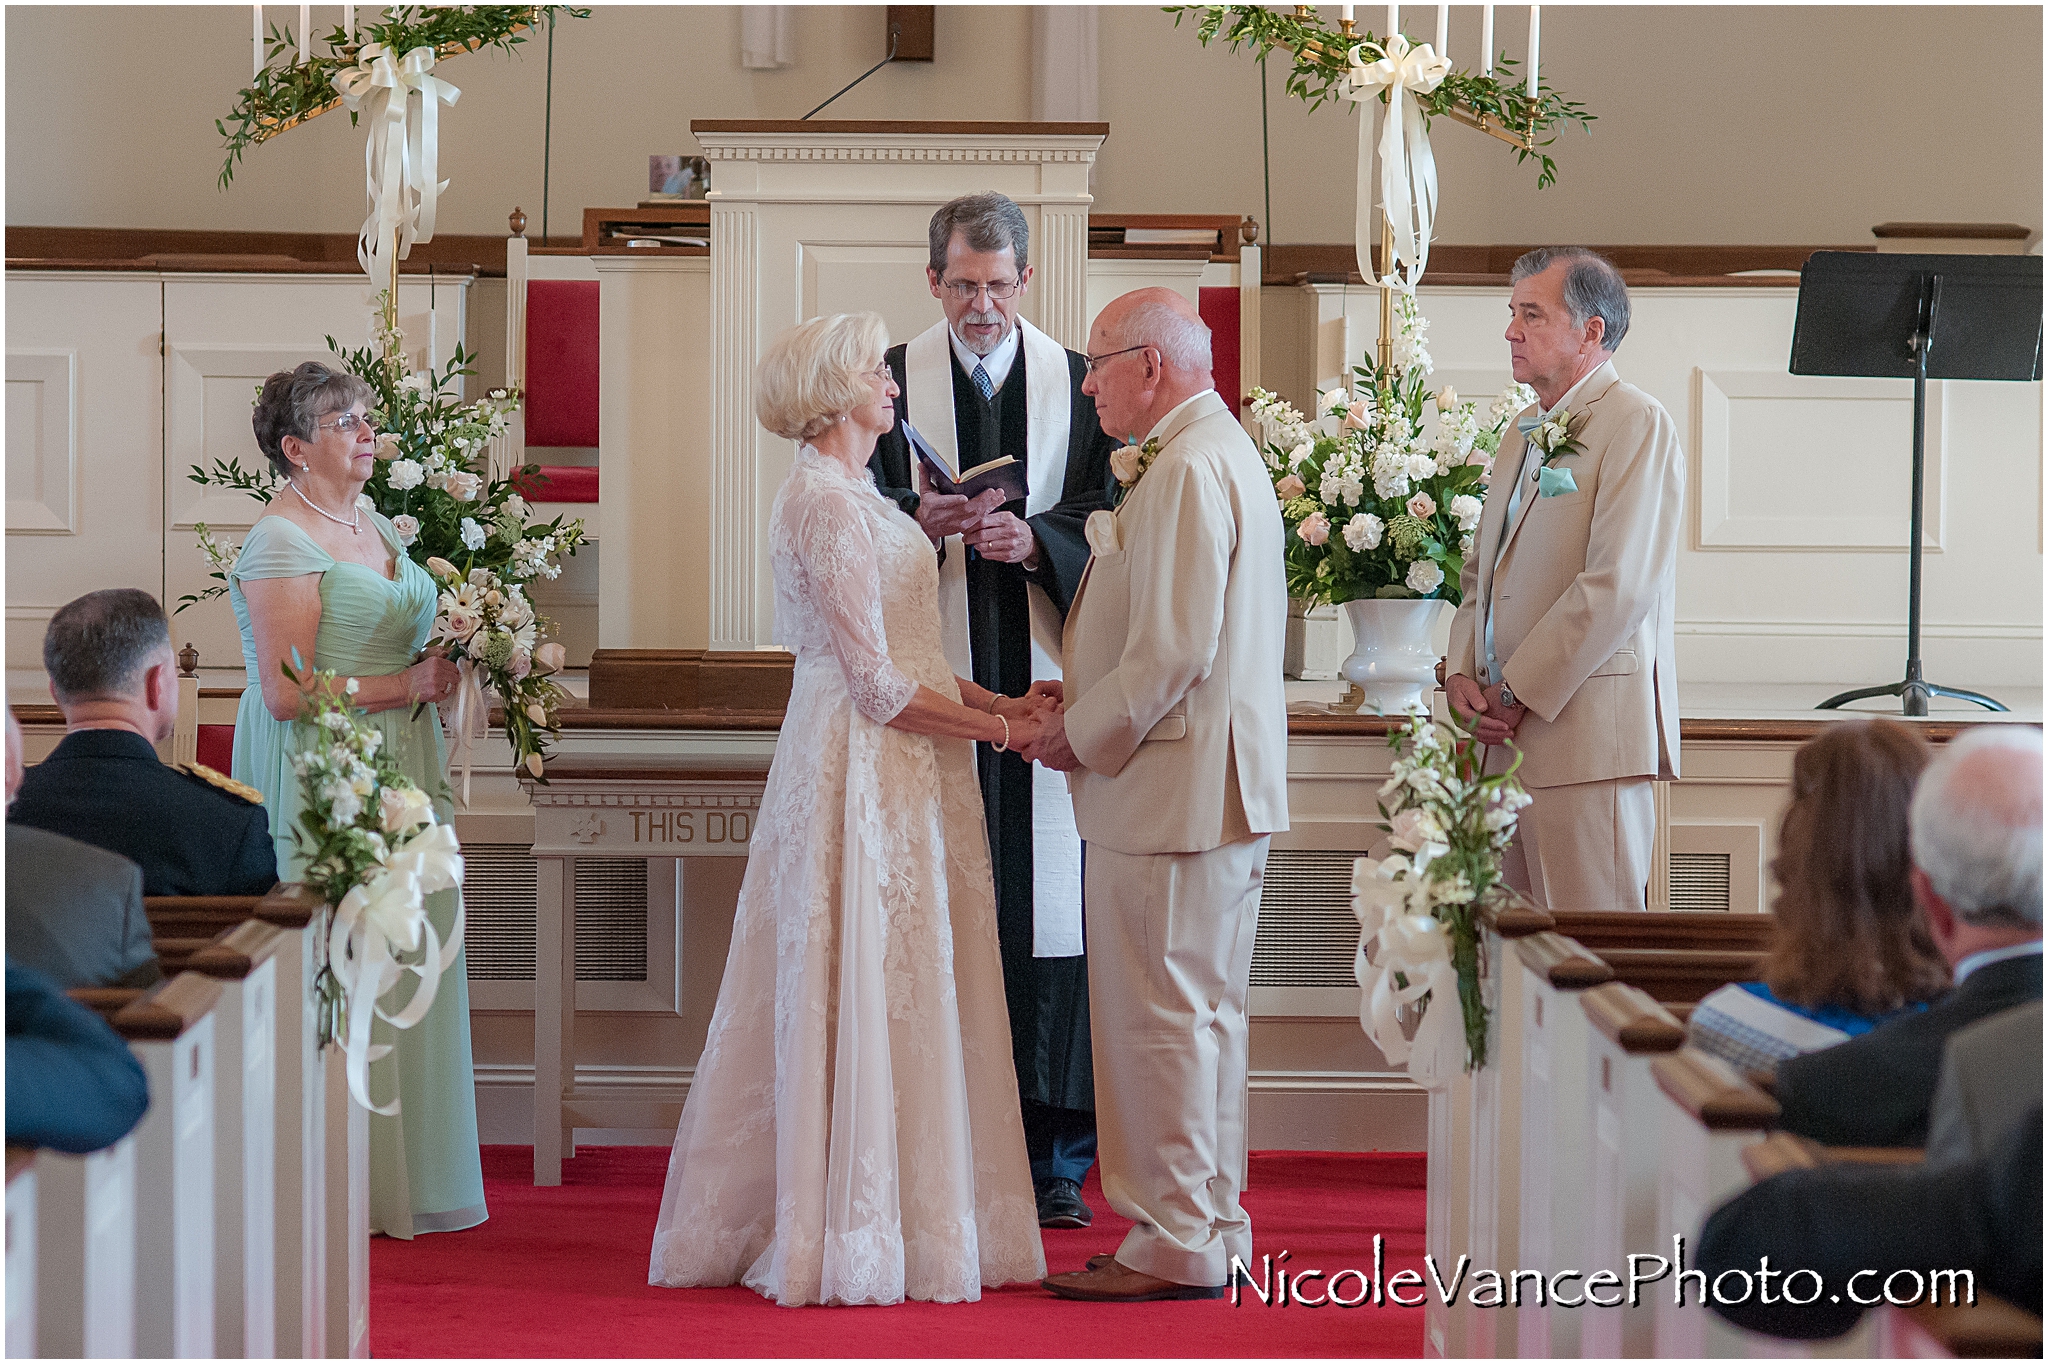 Vow exchange during the wedding ceremony at Crestwood Presbyterian Church in Richmond VA